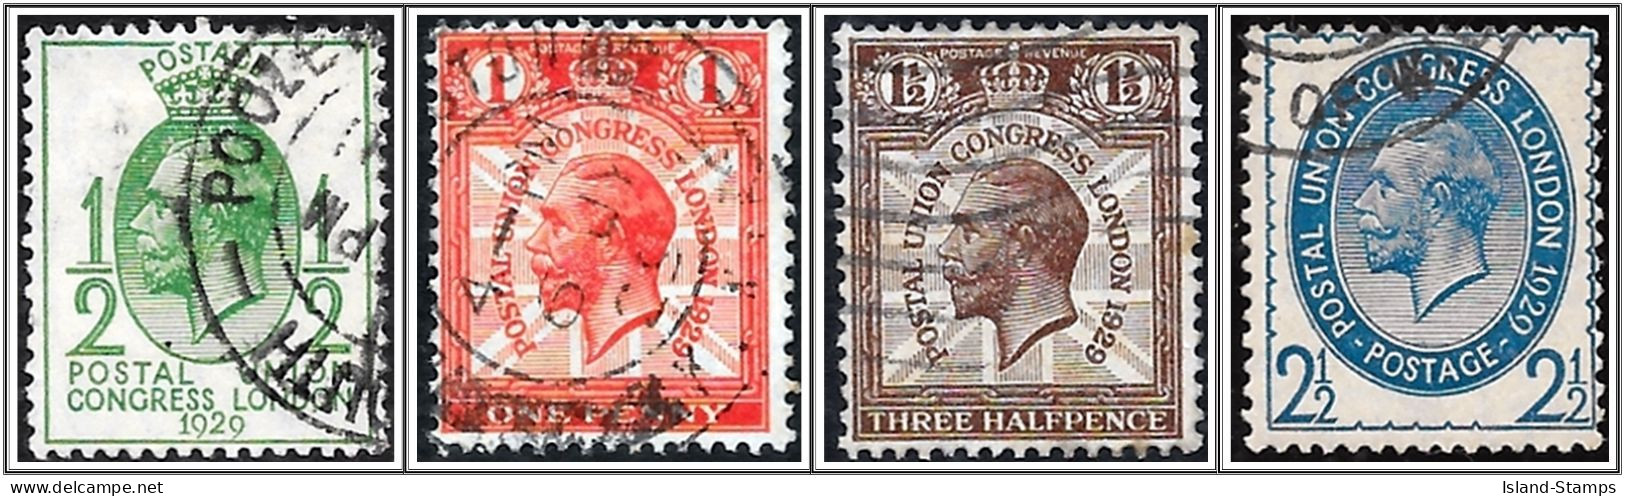 1929 9th UPU Congress,London Set SG 434-7 Used Hrd2 - Unused Stamps